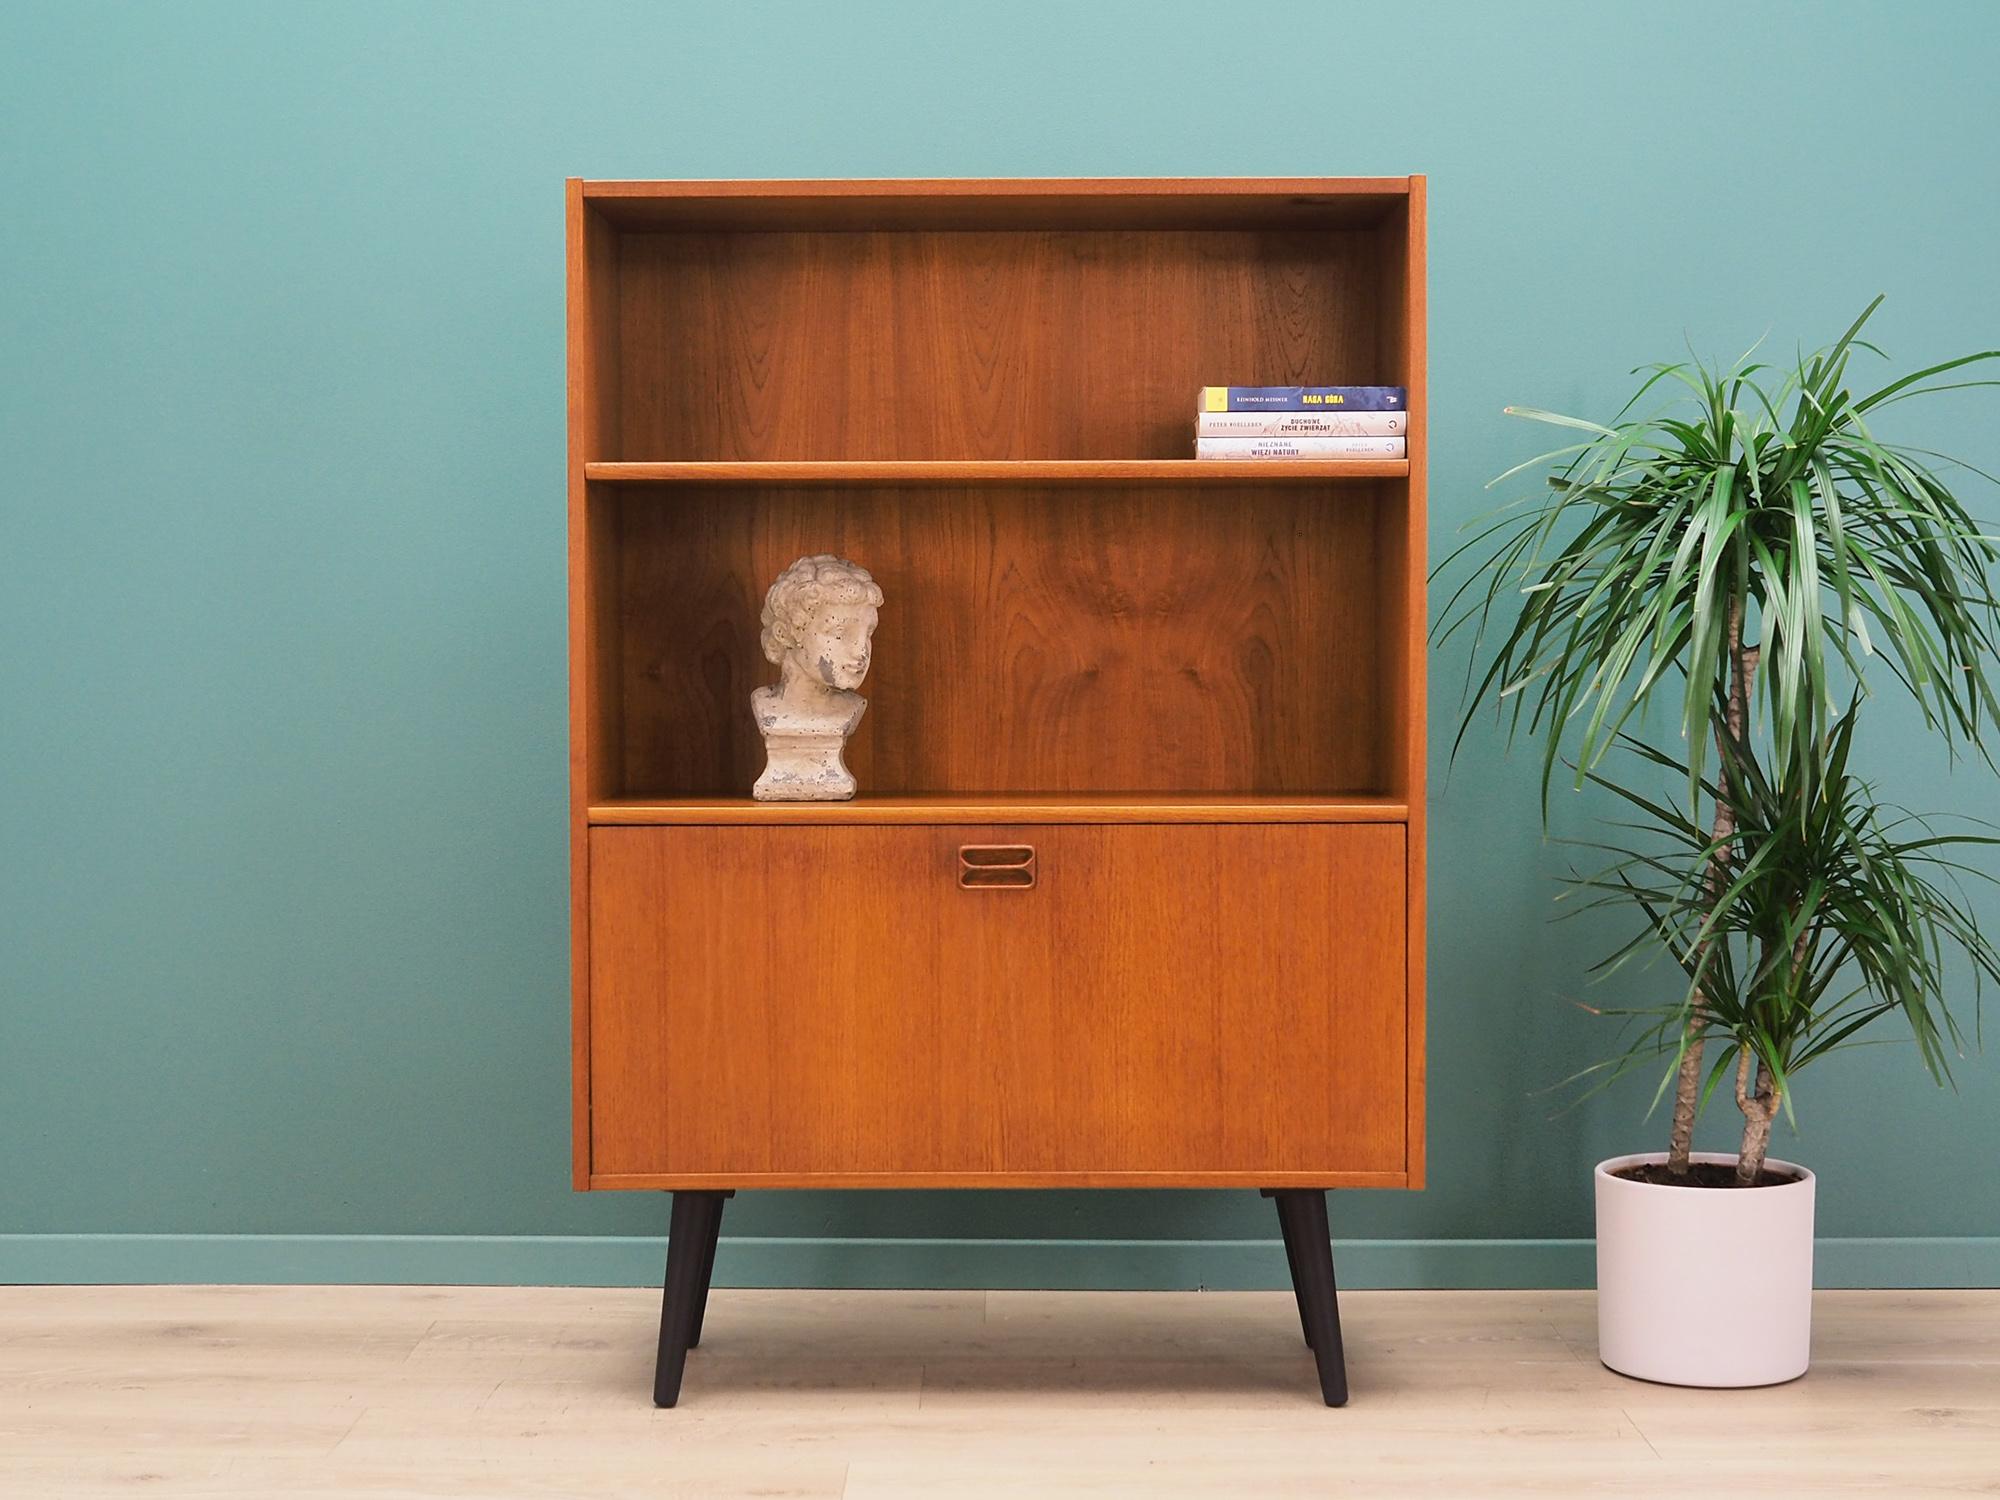 Bookcase was made in the 1960s, Danish production.

The structure is covered with teak veneer. Legs made of solid wood stained black. Surface after refreshing. Inside the space has been filled with practical shelves. Shelves are adjustable in